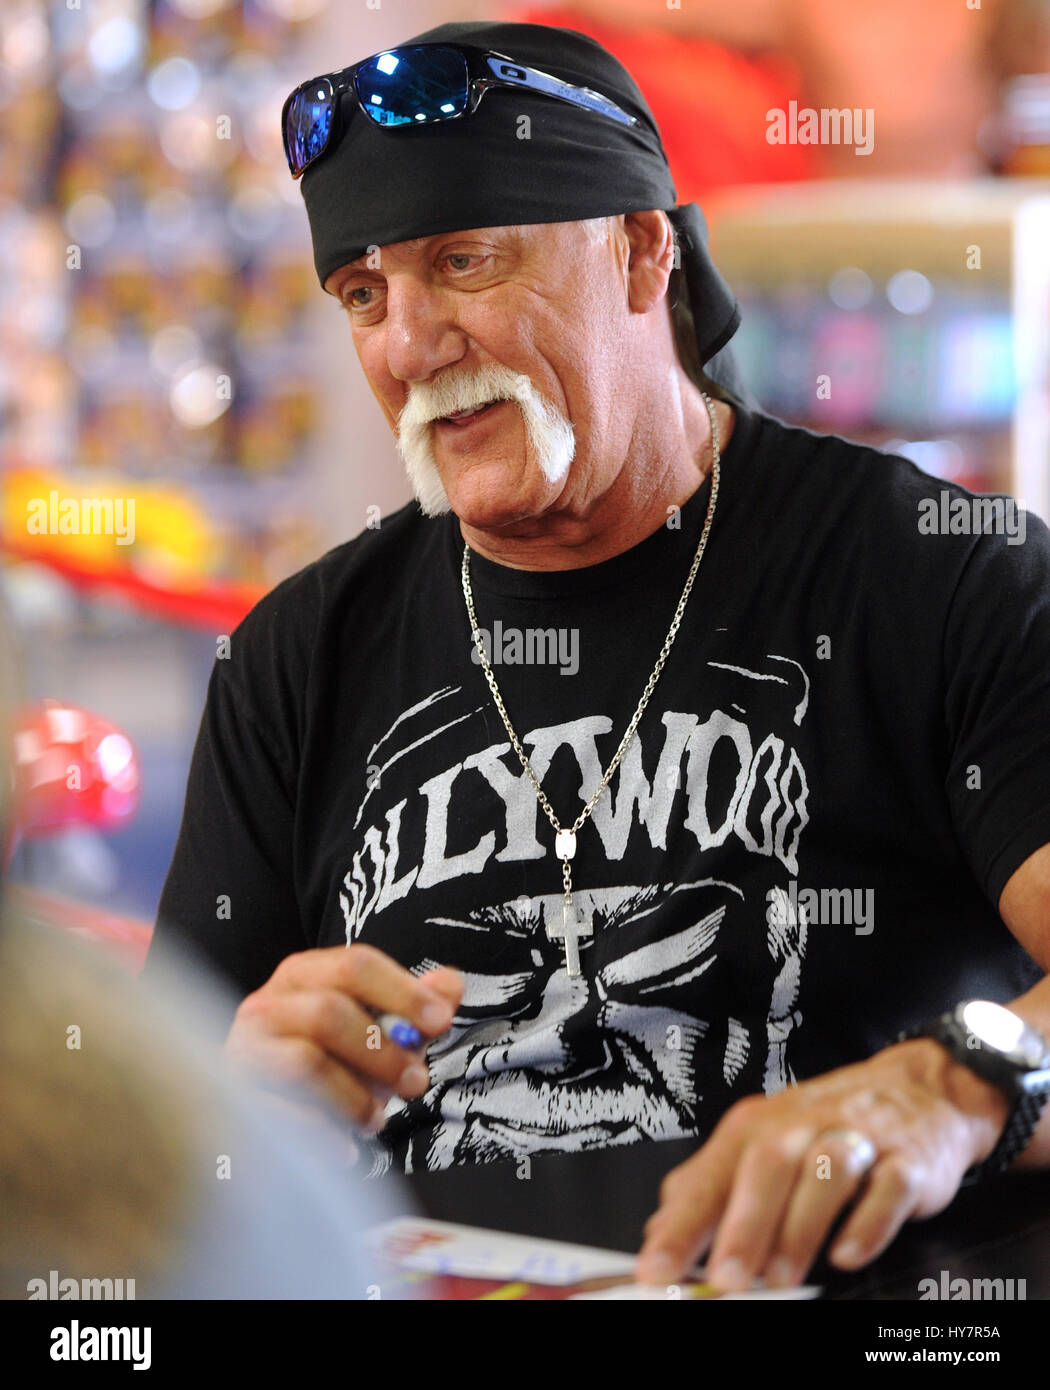 Orlando, Florida, USA. 1st April, 2017. Semi-retired professional wrestler Terry Gene Bollea, better known by his ring name Hulk Hogan, signs autographs for fans at Hogan's Beach Shop, his retail merchandise store  which opened on March 30, 2017 in Orlando, Florida. Credit: Paul Hennessy/Alamy Live News Stock Photo